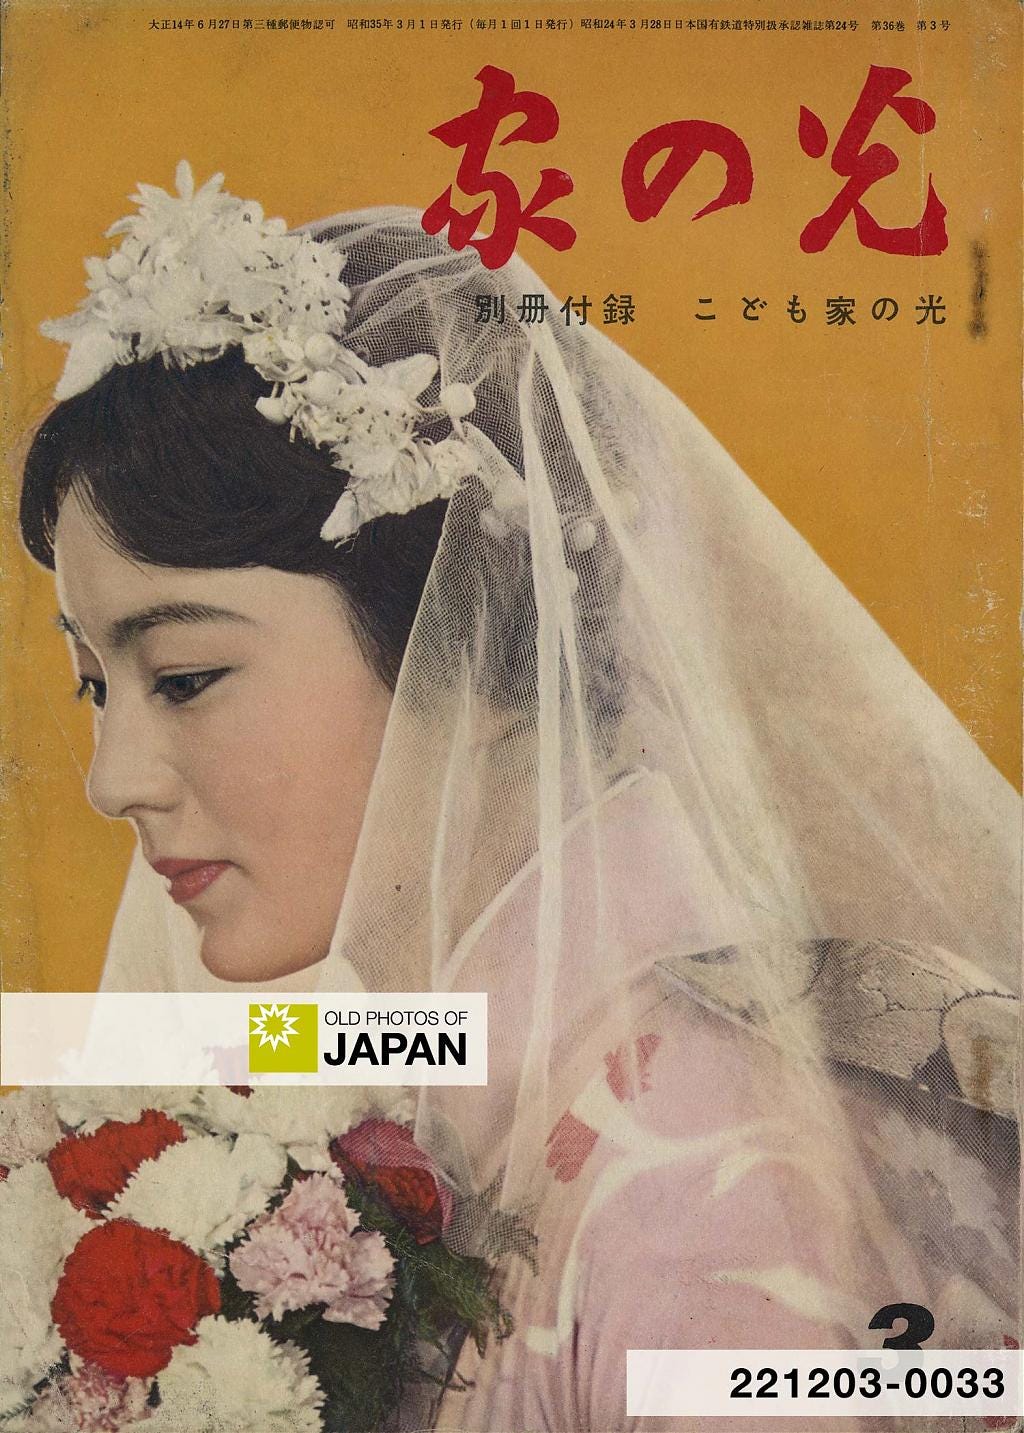 Japanese bride in a western style veil and kimono, 1960